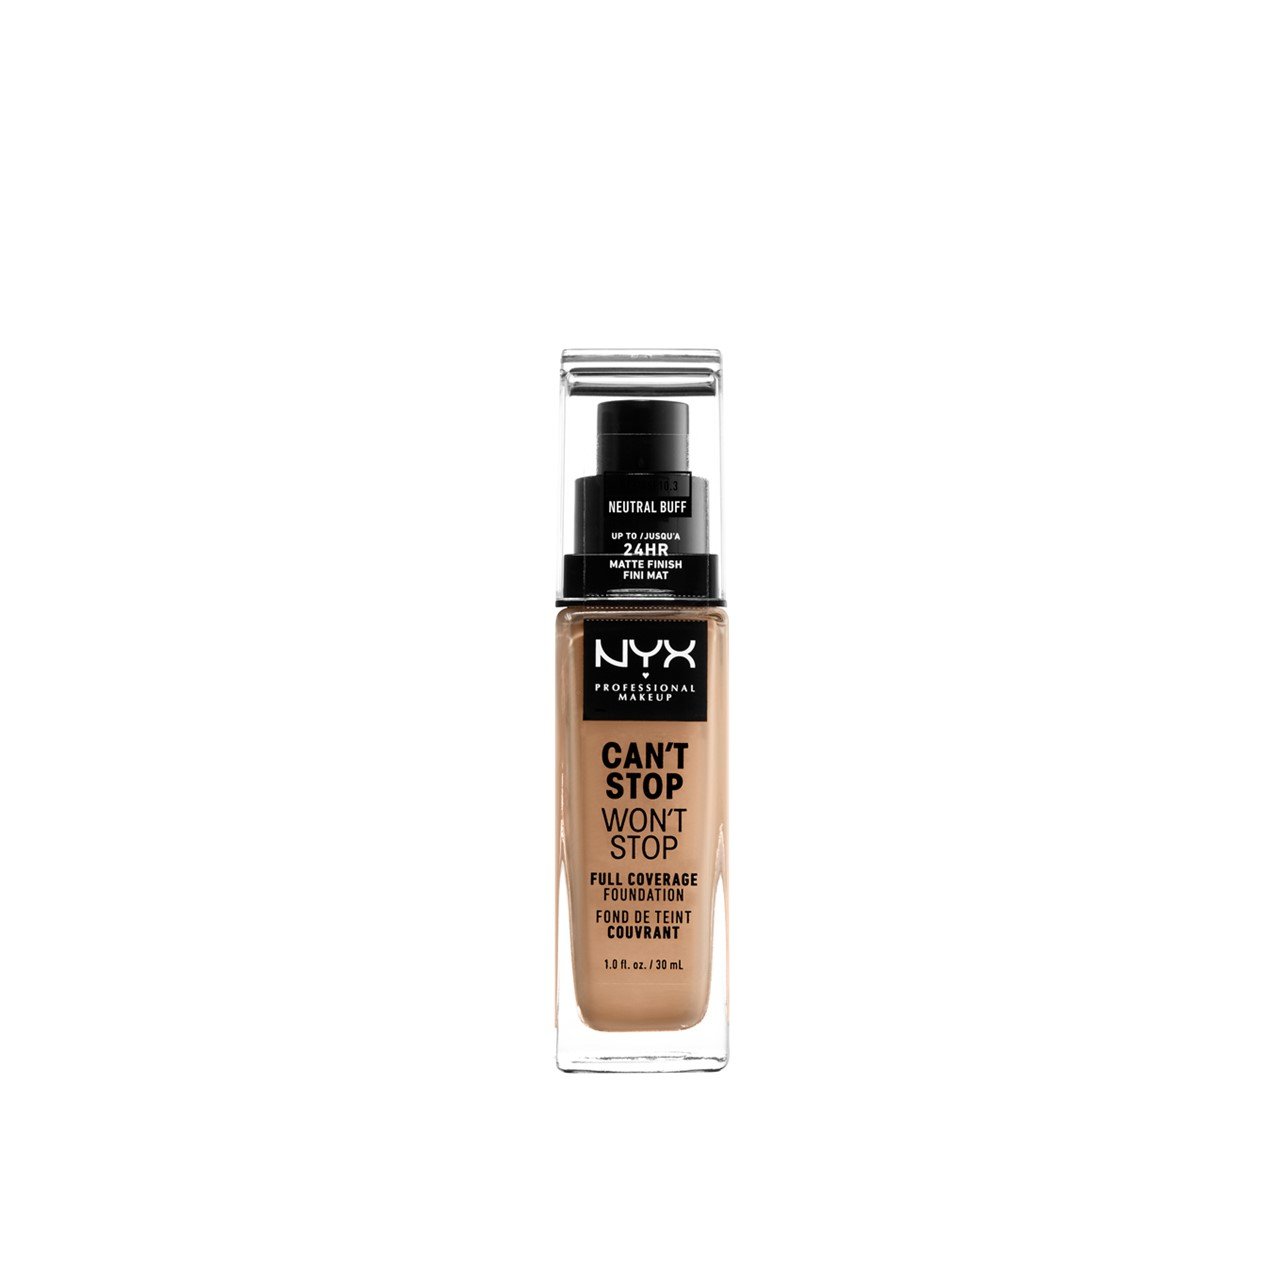 NYX Pro Makeup Can't Stop Won't Stop Foundation Neutral Buff 30ml (1.01fl oz)